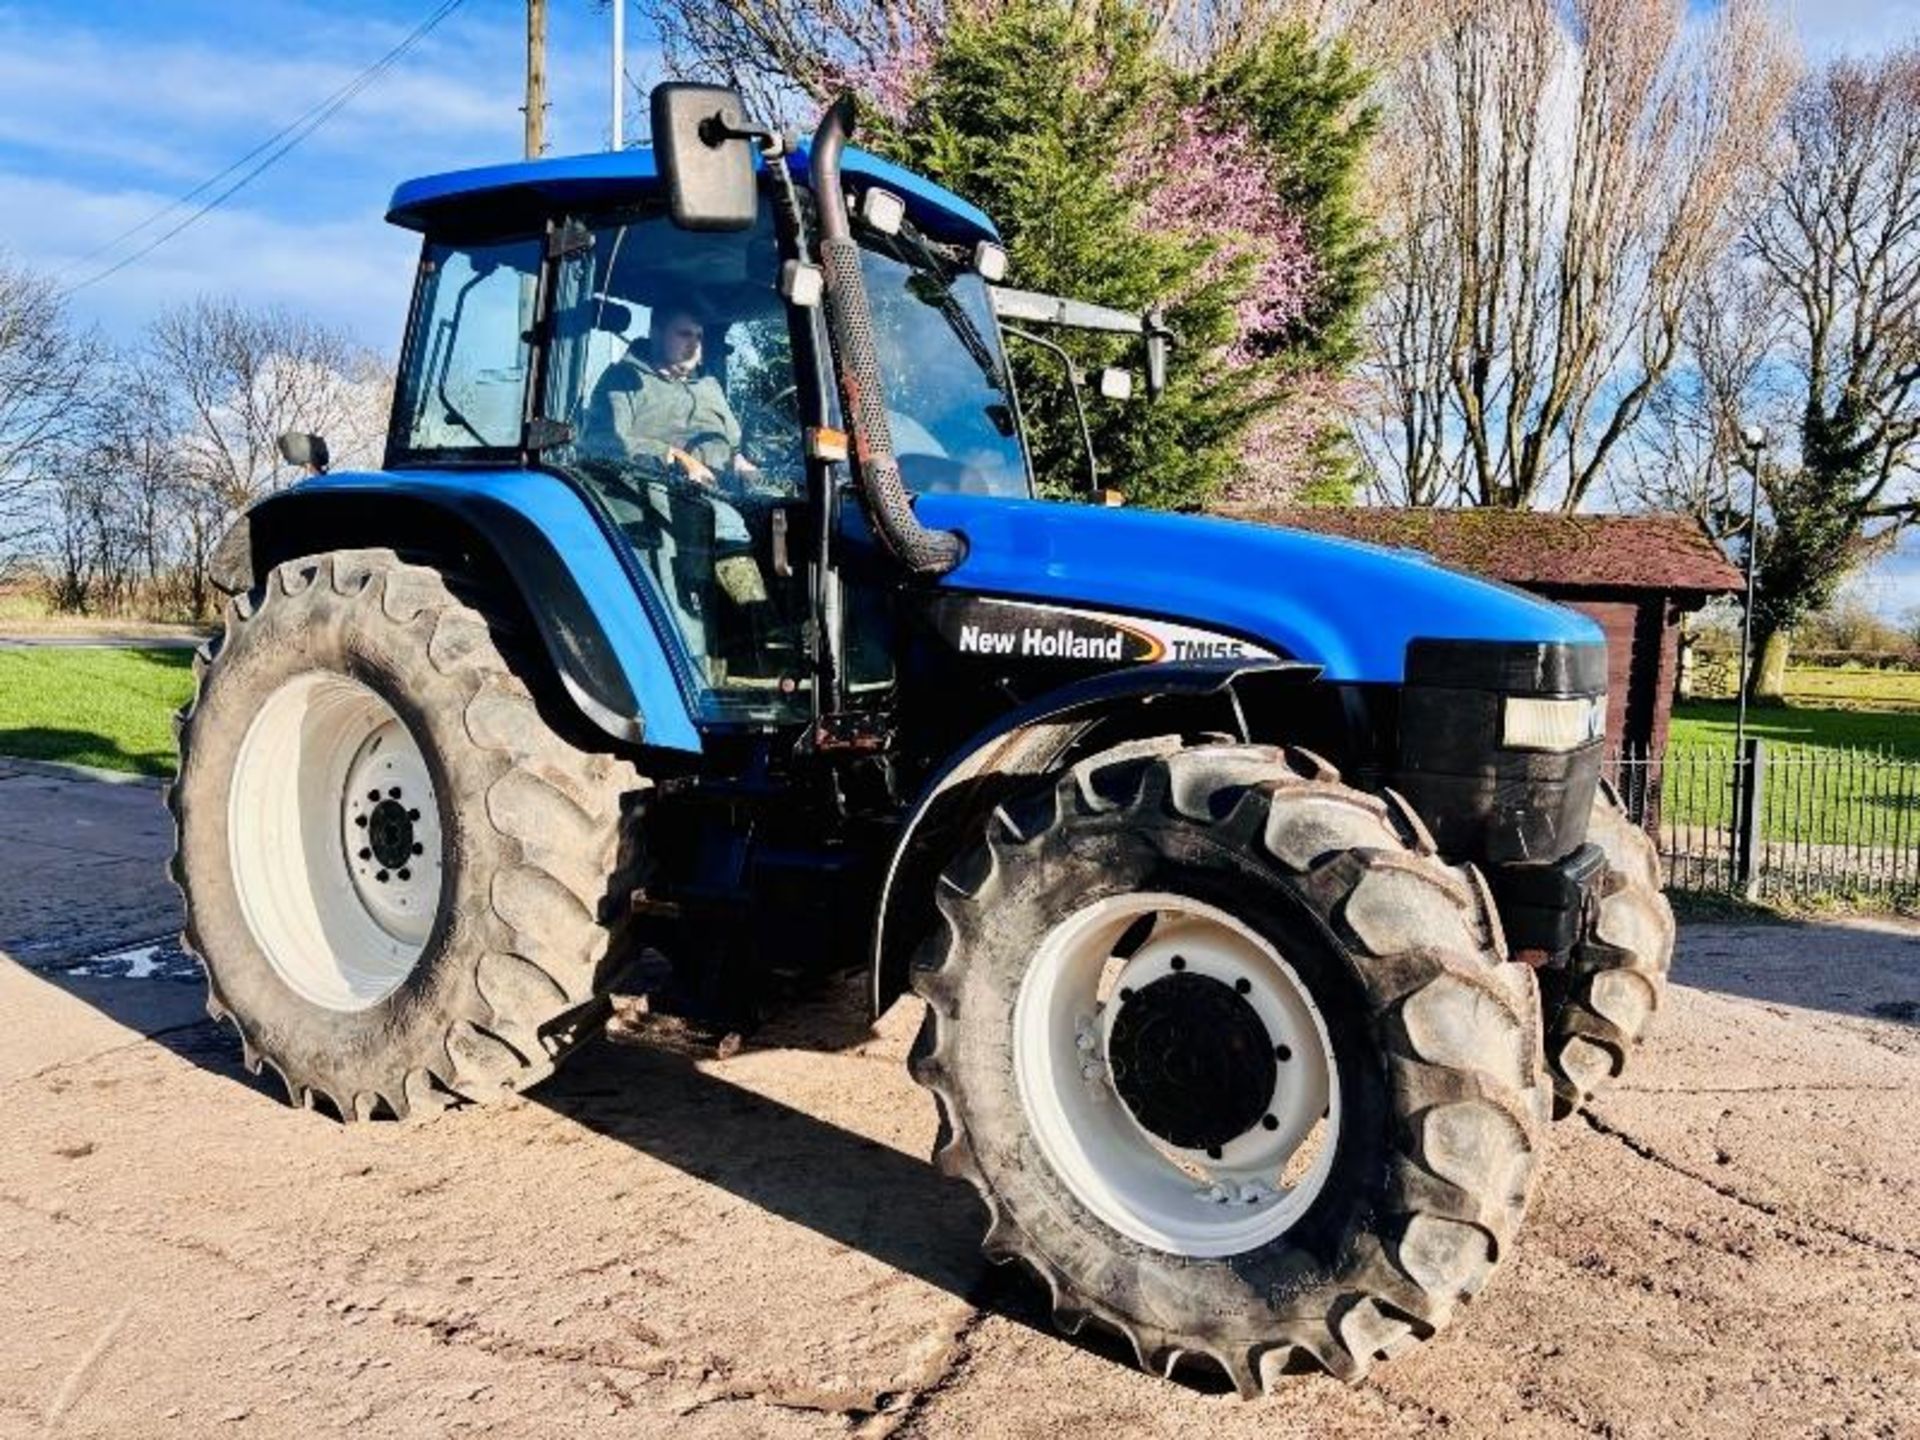 NEW HOLLAND TM155 4WD TRACTOR *5619 HOURS* C/W RANGE COMMAND GEAR BOX 